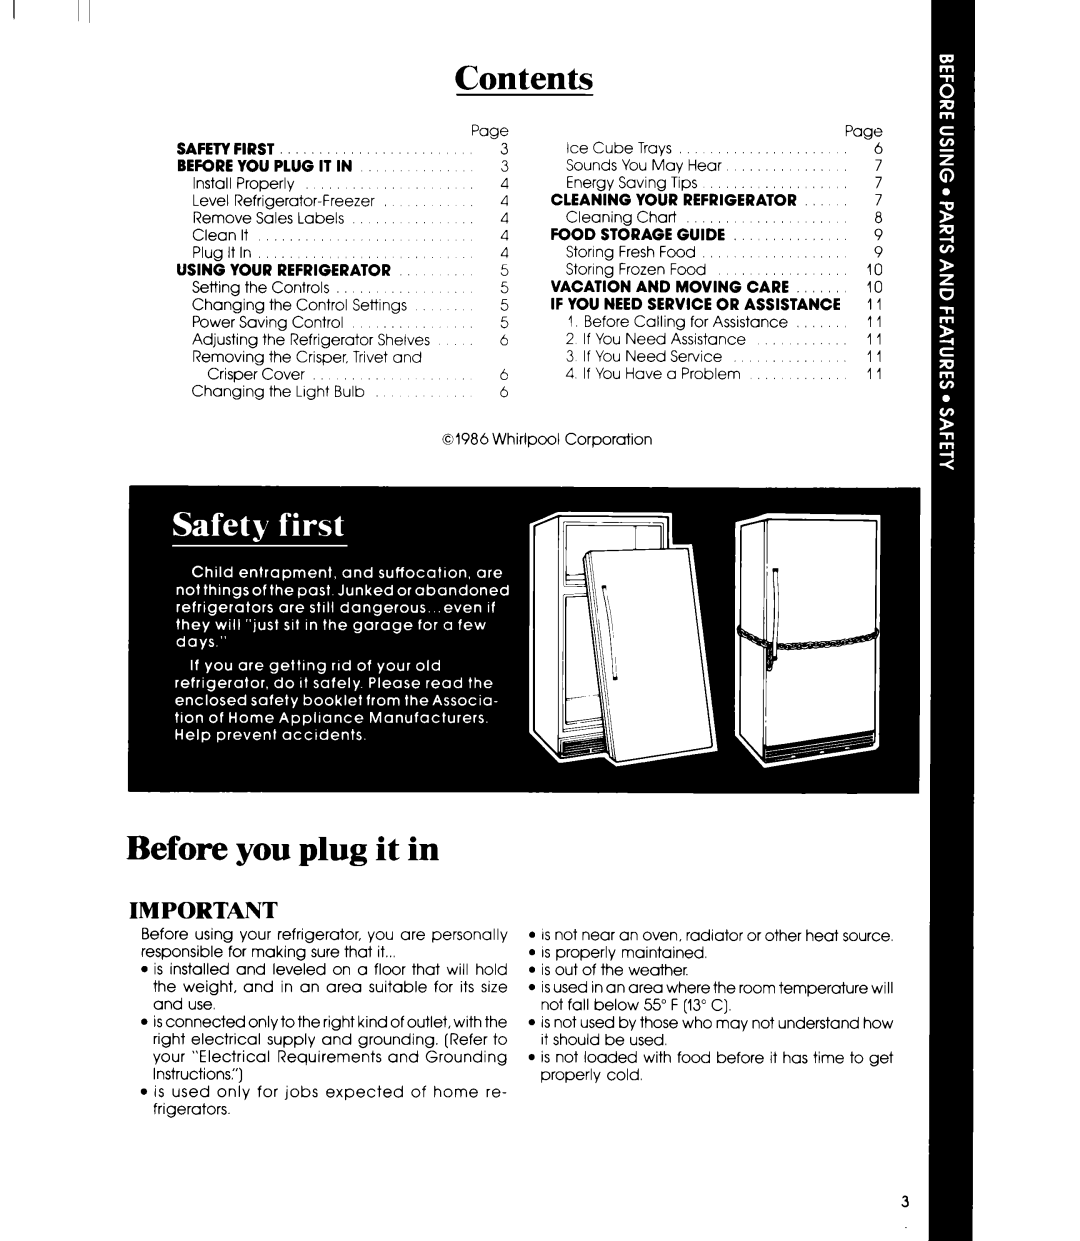 Whirlpool ETl8SC manual Contents, Before you plug it in, Safetyfirst, Using Your Refrigerator, Cleaning Your Refrigerator 